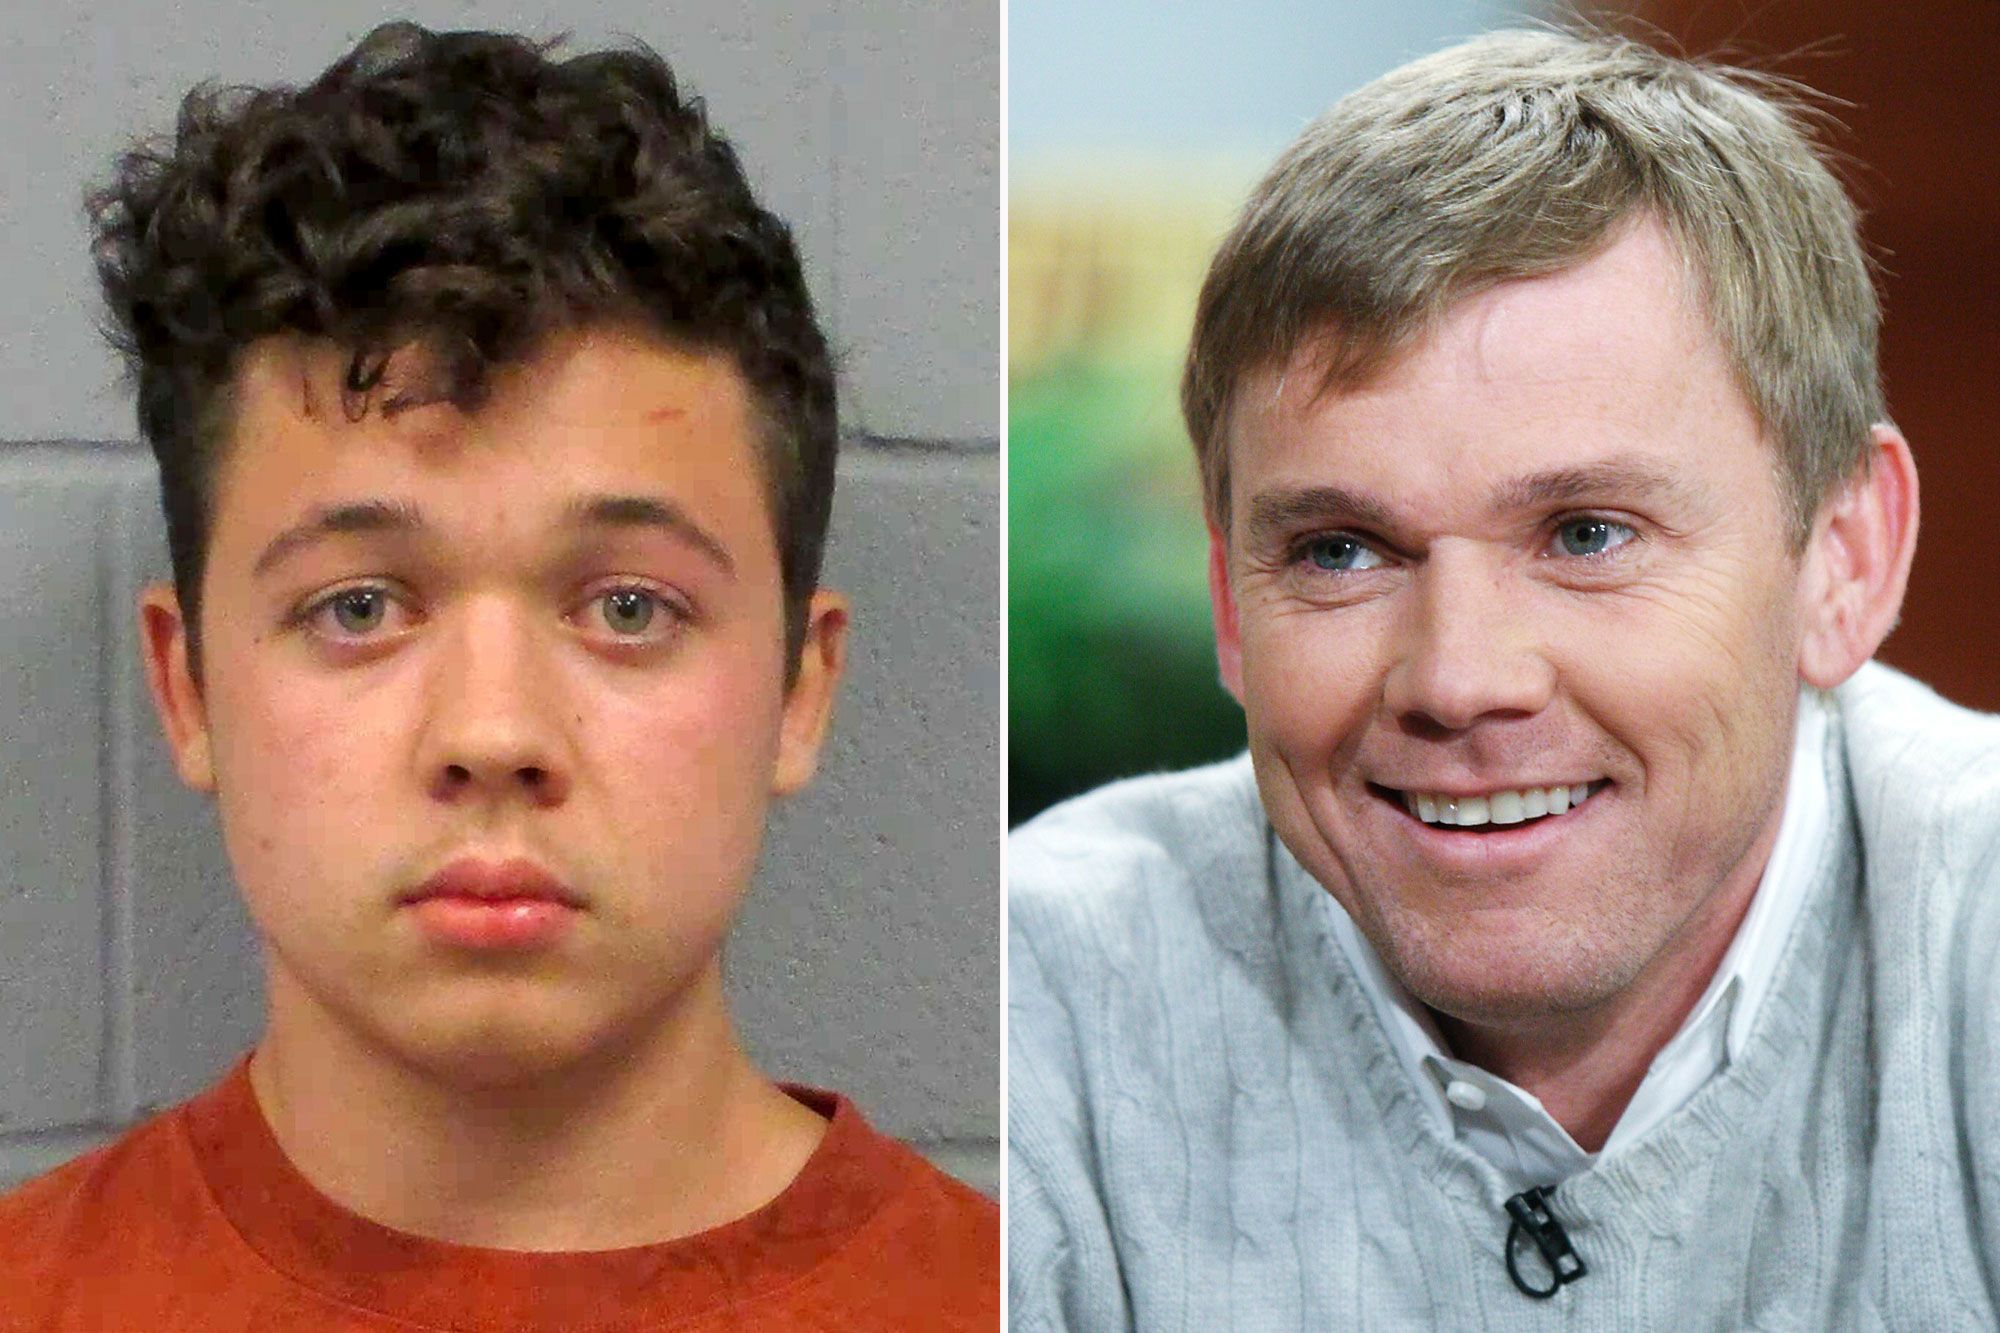 Actor Ricky Schroder Helped Pay Kyle Rittenhouse’s $2 Million Bail